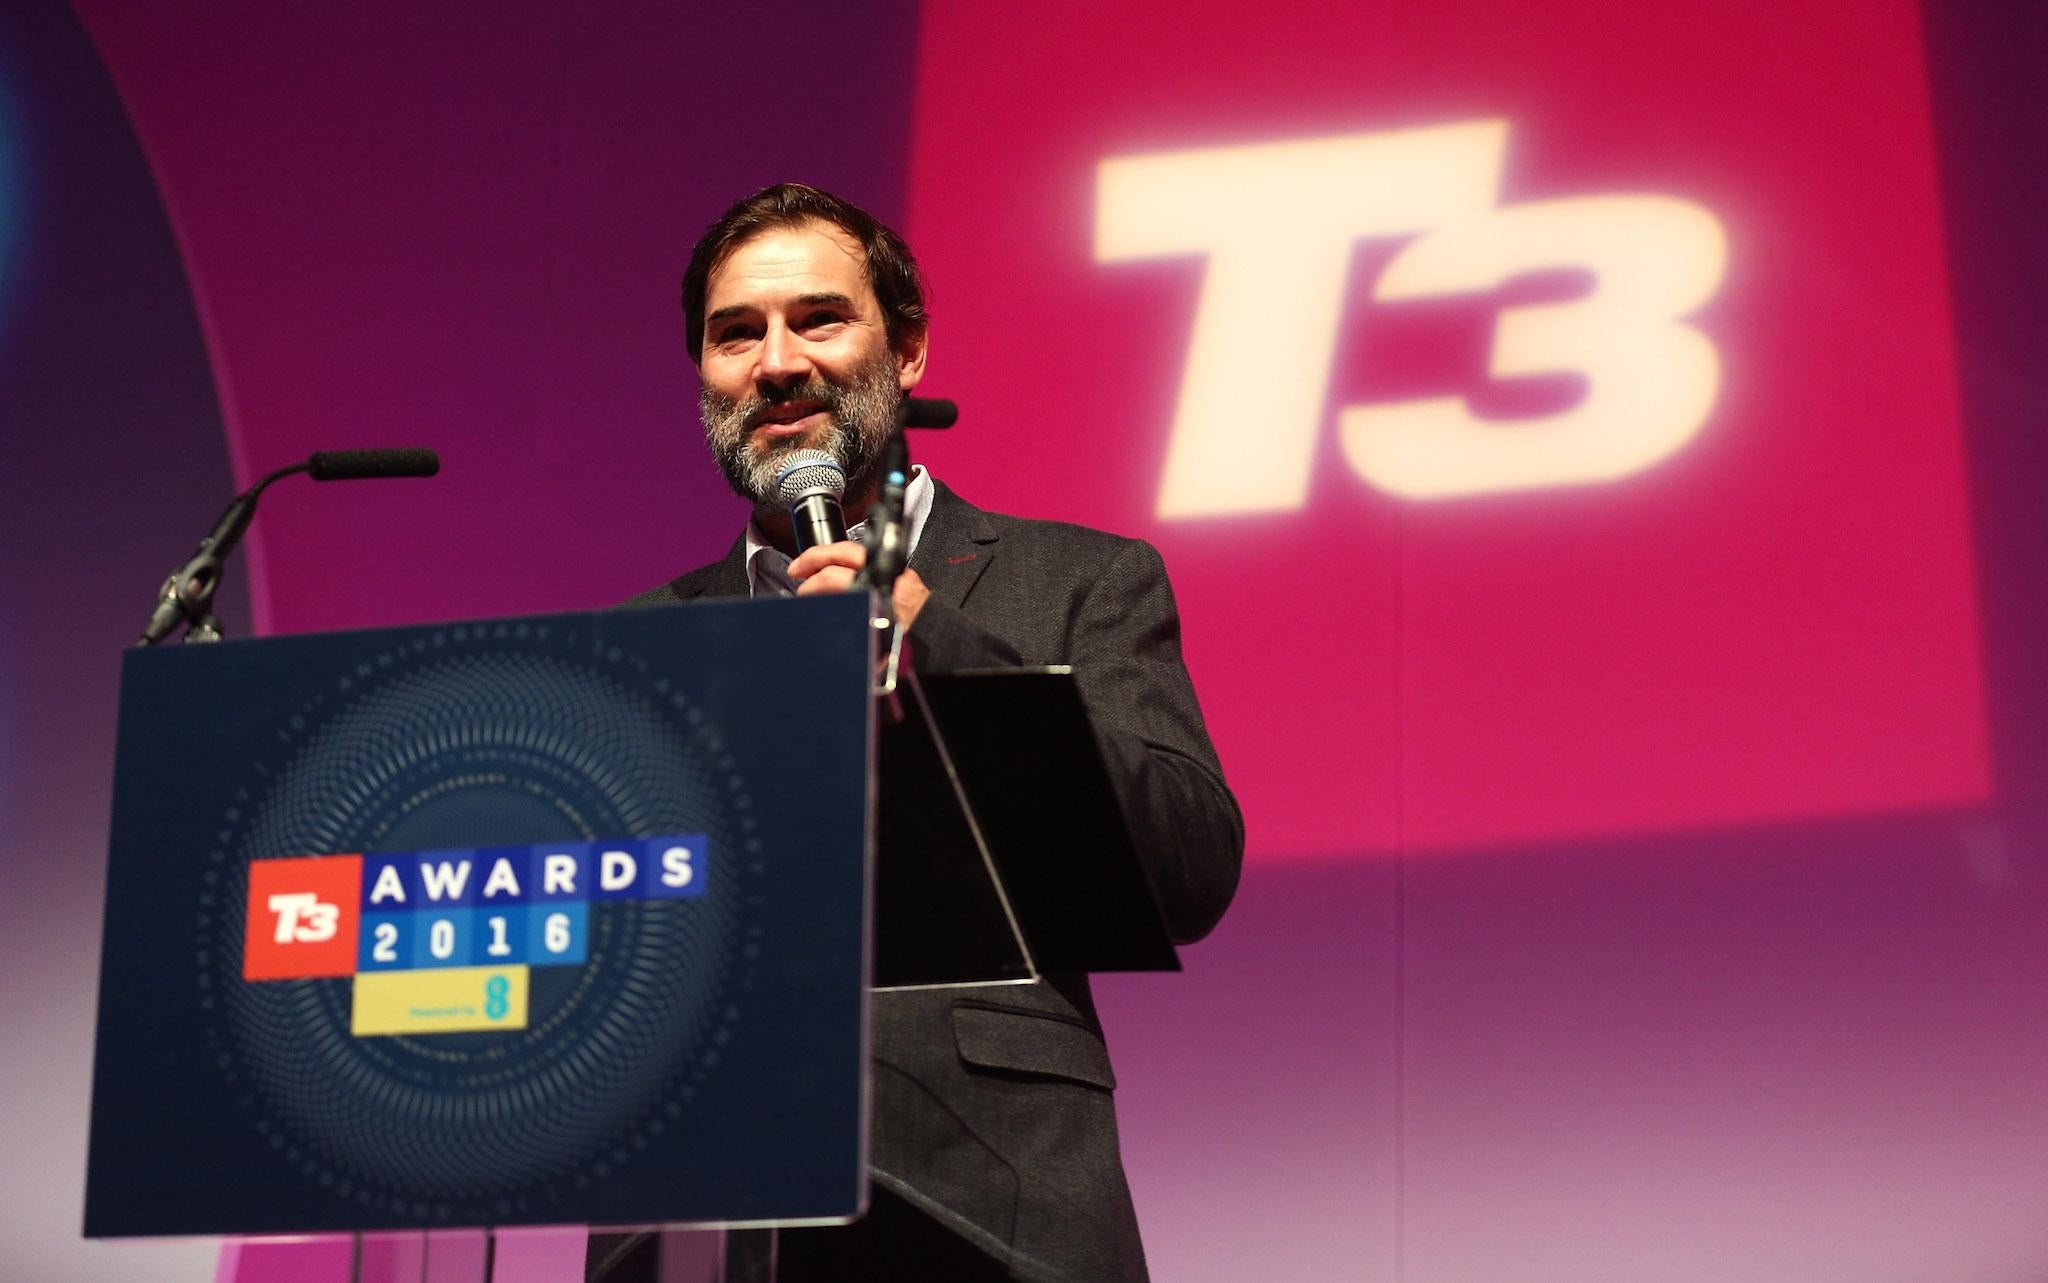 Adam Buxton presenting the T3 Gadget Awards 2016 at The Lindley Hall on September 28, 2016 in London, England